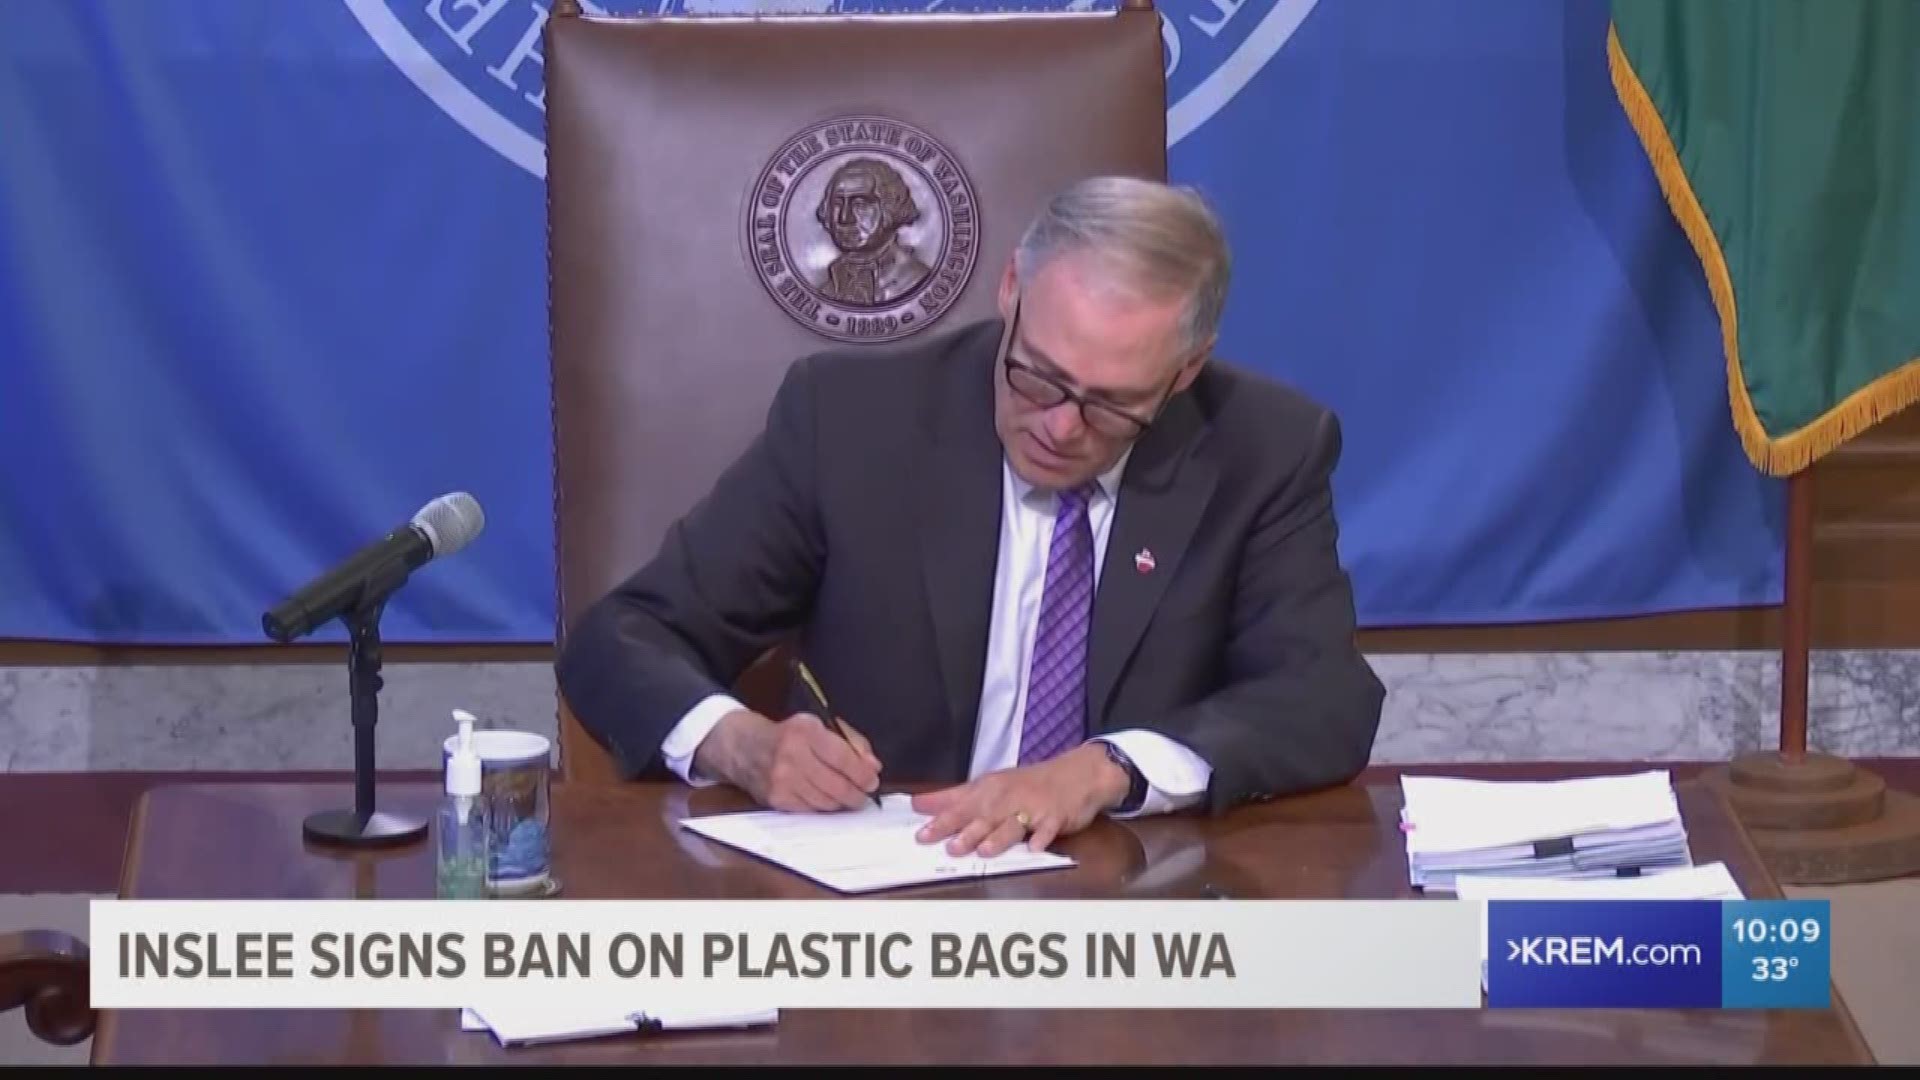 The legislation bans retailers from giving out single-use plastic carryout bags and requires an 8-cent charge for others. It goes into effect on Jan. 1, 2021.